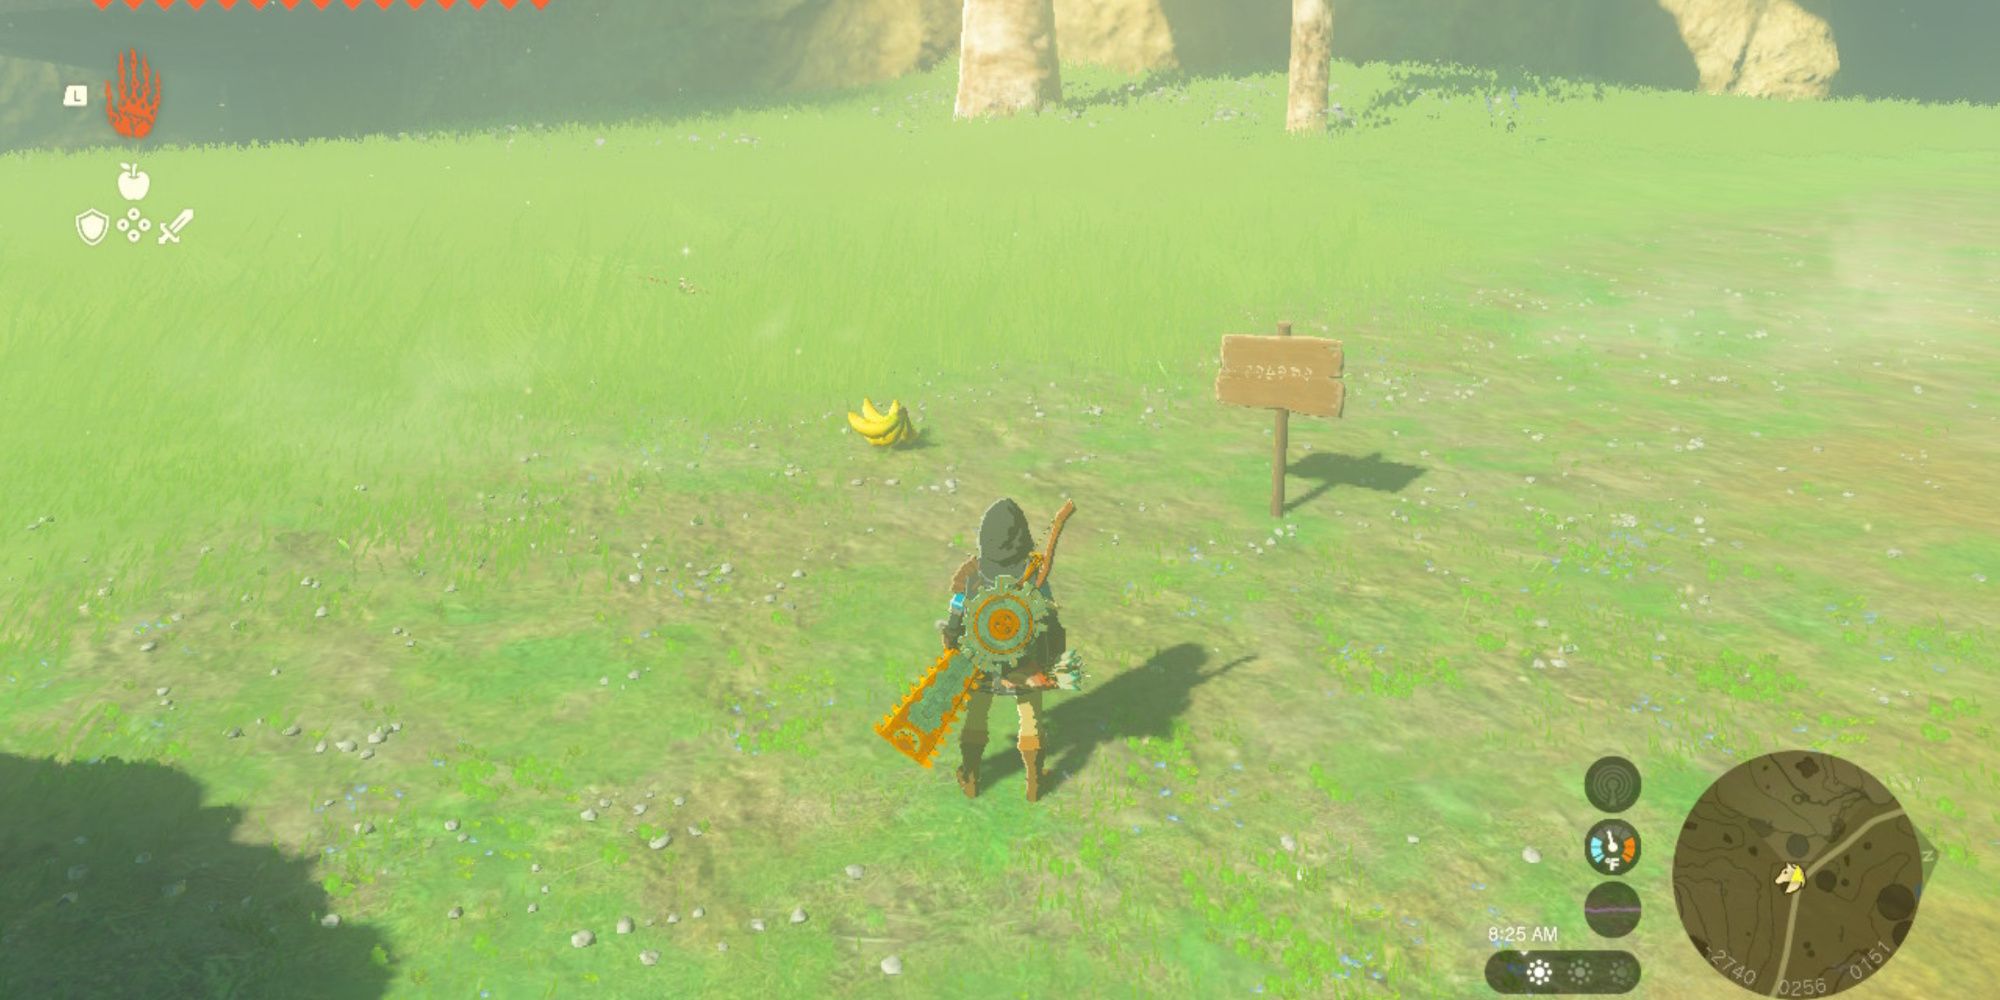 The Legend of Zelda: Tears of the Kingdom Release a powerful banana on the ground as a disguise trap for the Yiga clan